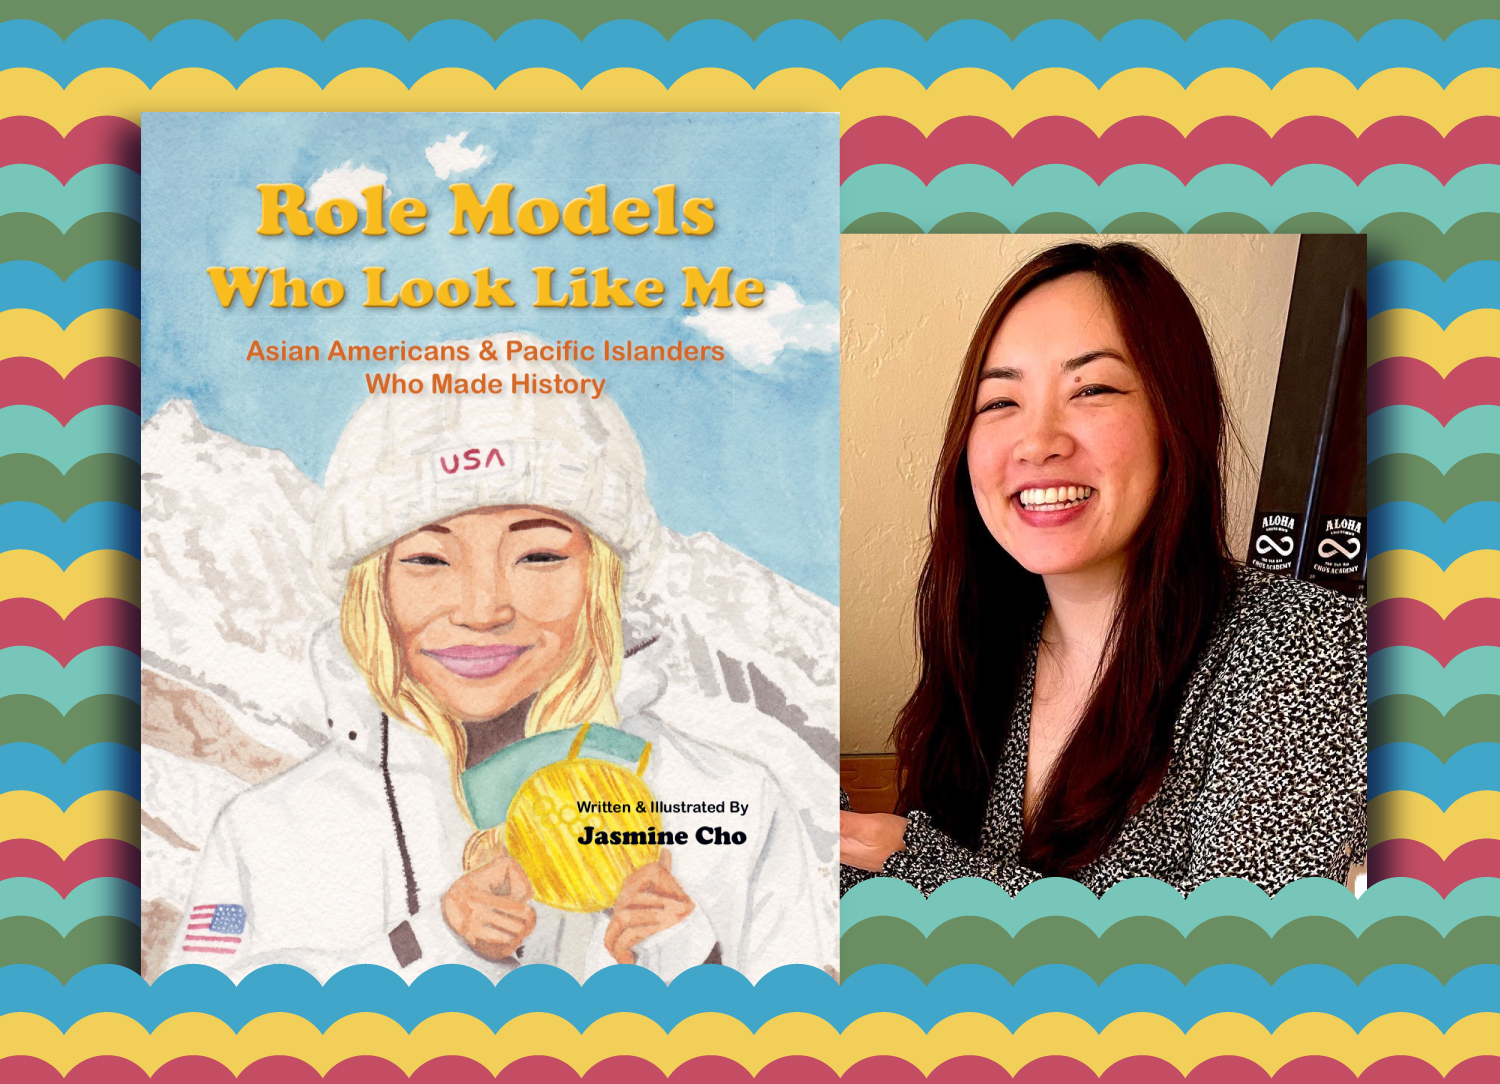 Cover of Role Models Who Look Like Me featuring a portrait of snowboarder Chloe Kim next to a photo of Jasmine Cho.